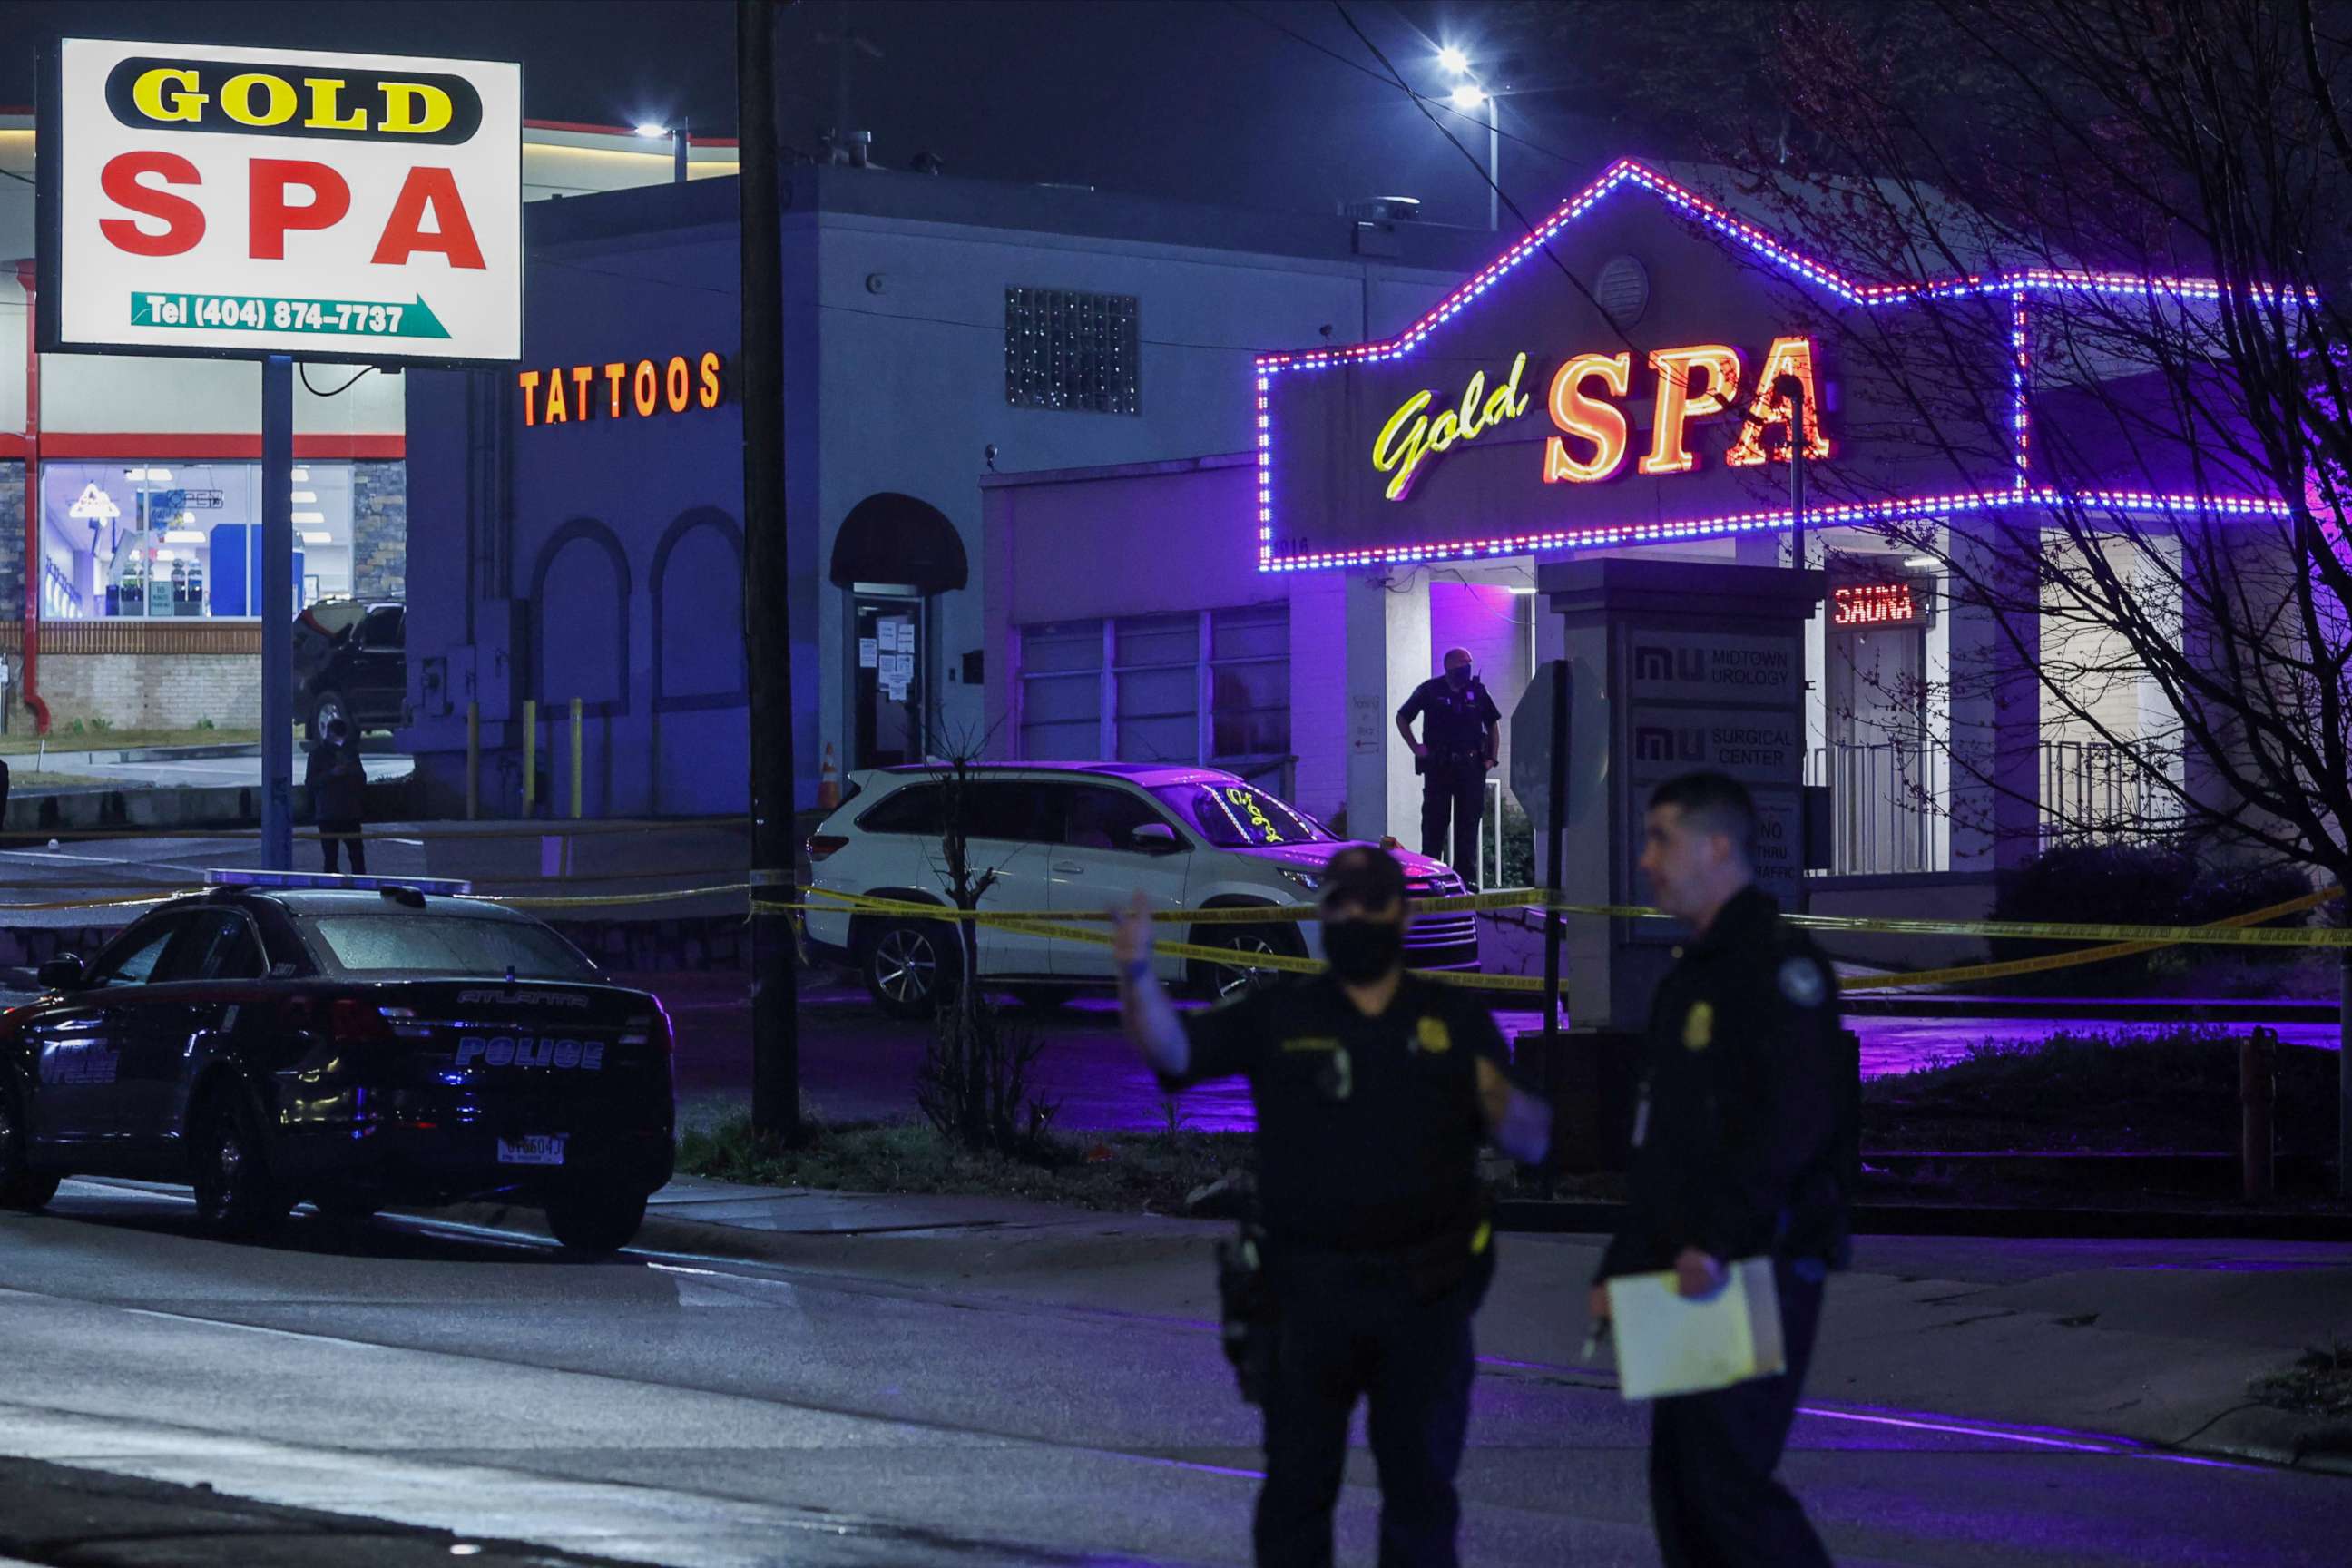 PHOTO: City of Atlanta police officers are seen outside of Gold Spa after deadly shootings at multiple locations in the Atlanta area, March 16, 2021.